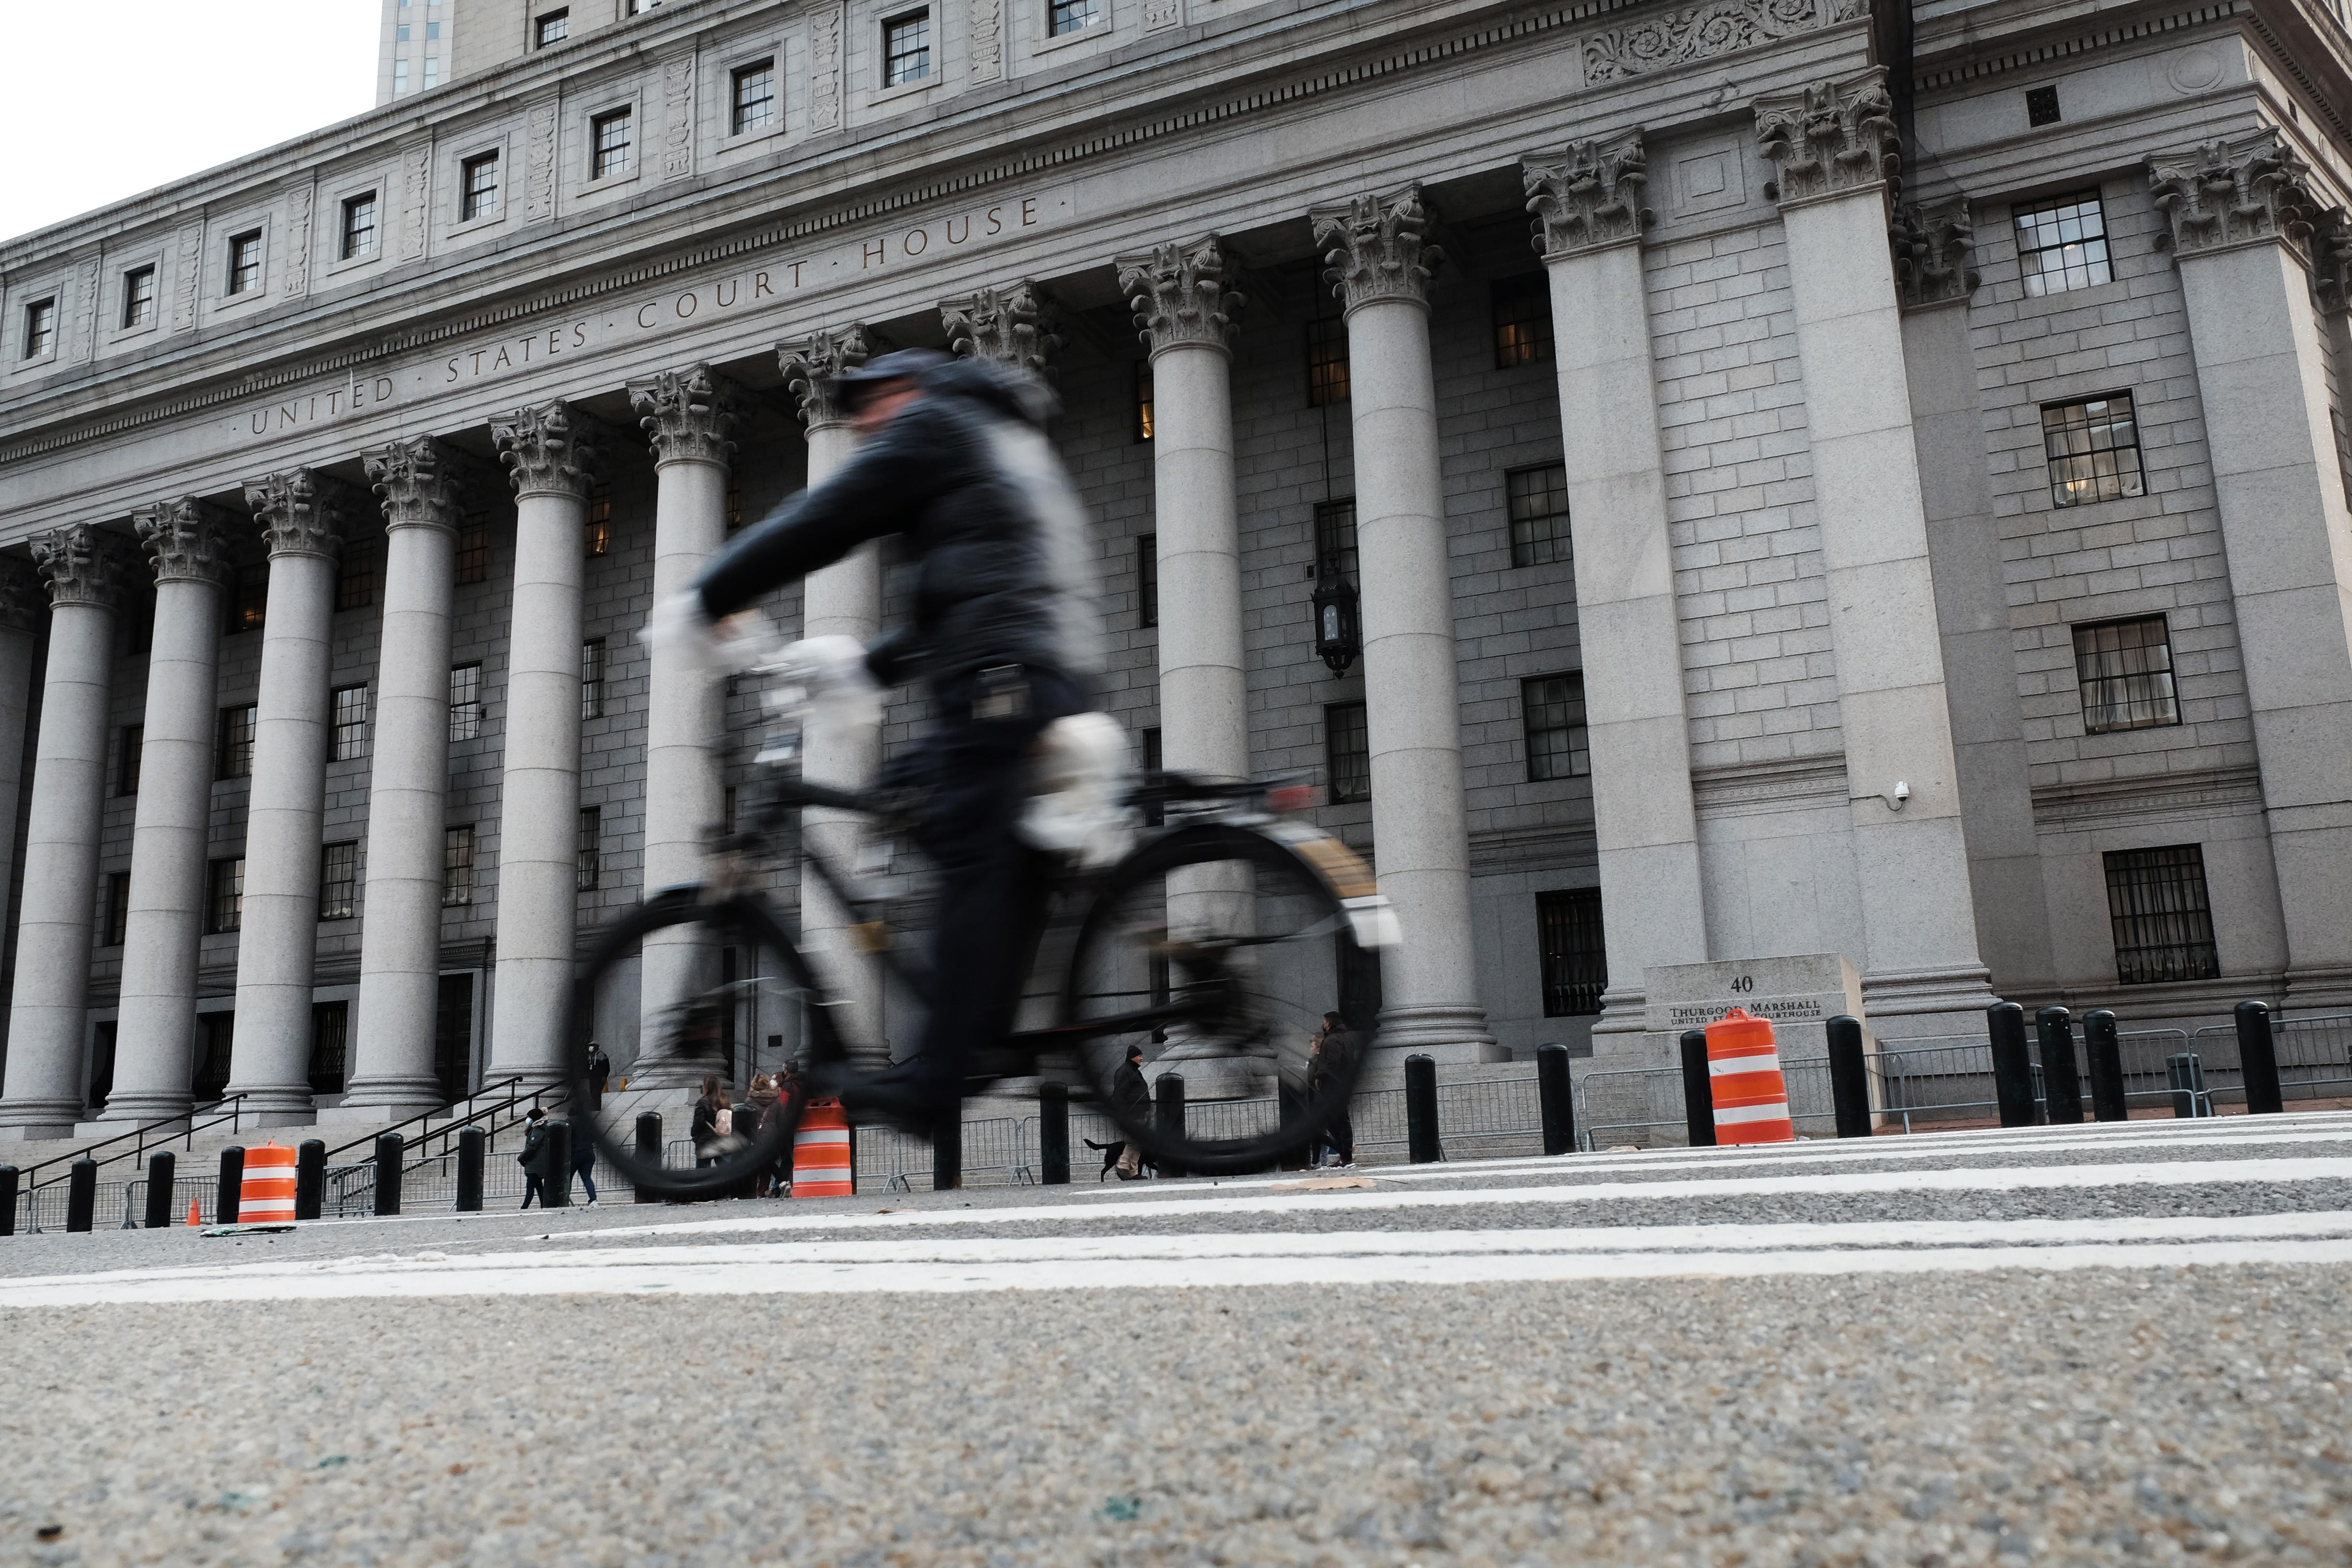 A cyclist passes in front of the courthouse